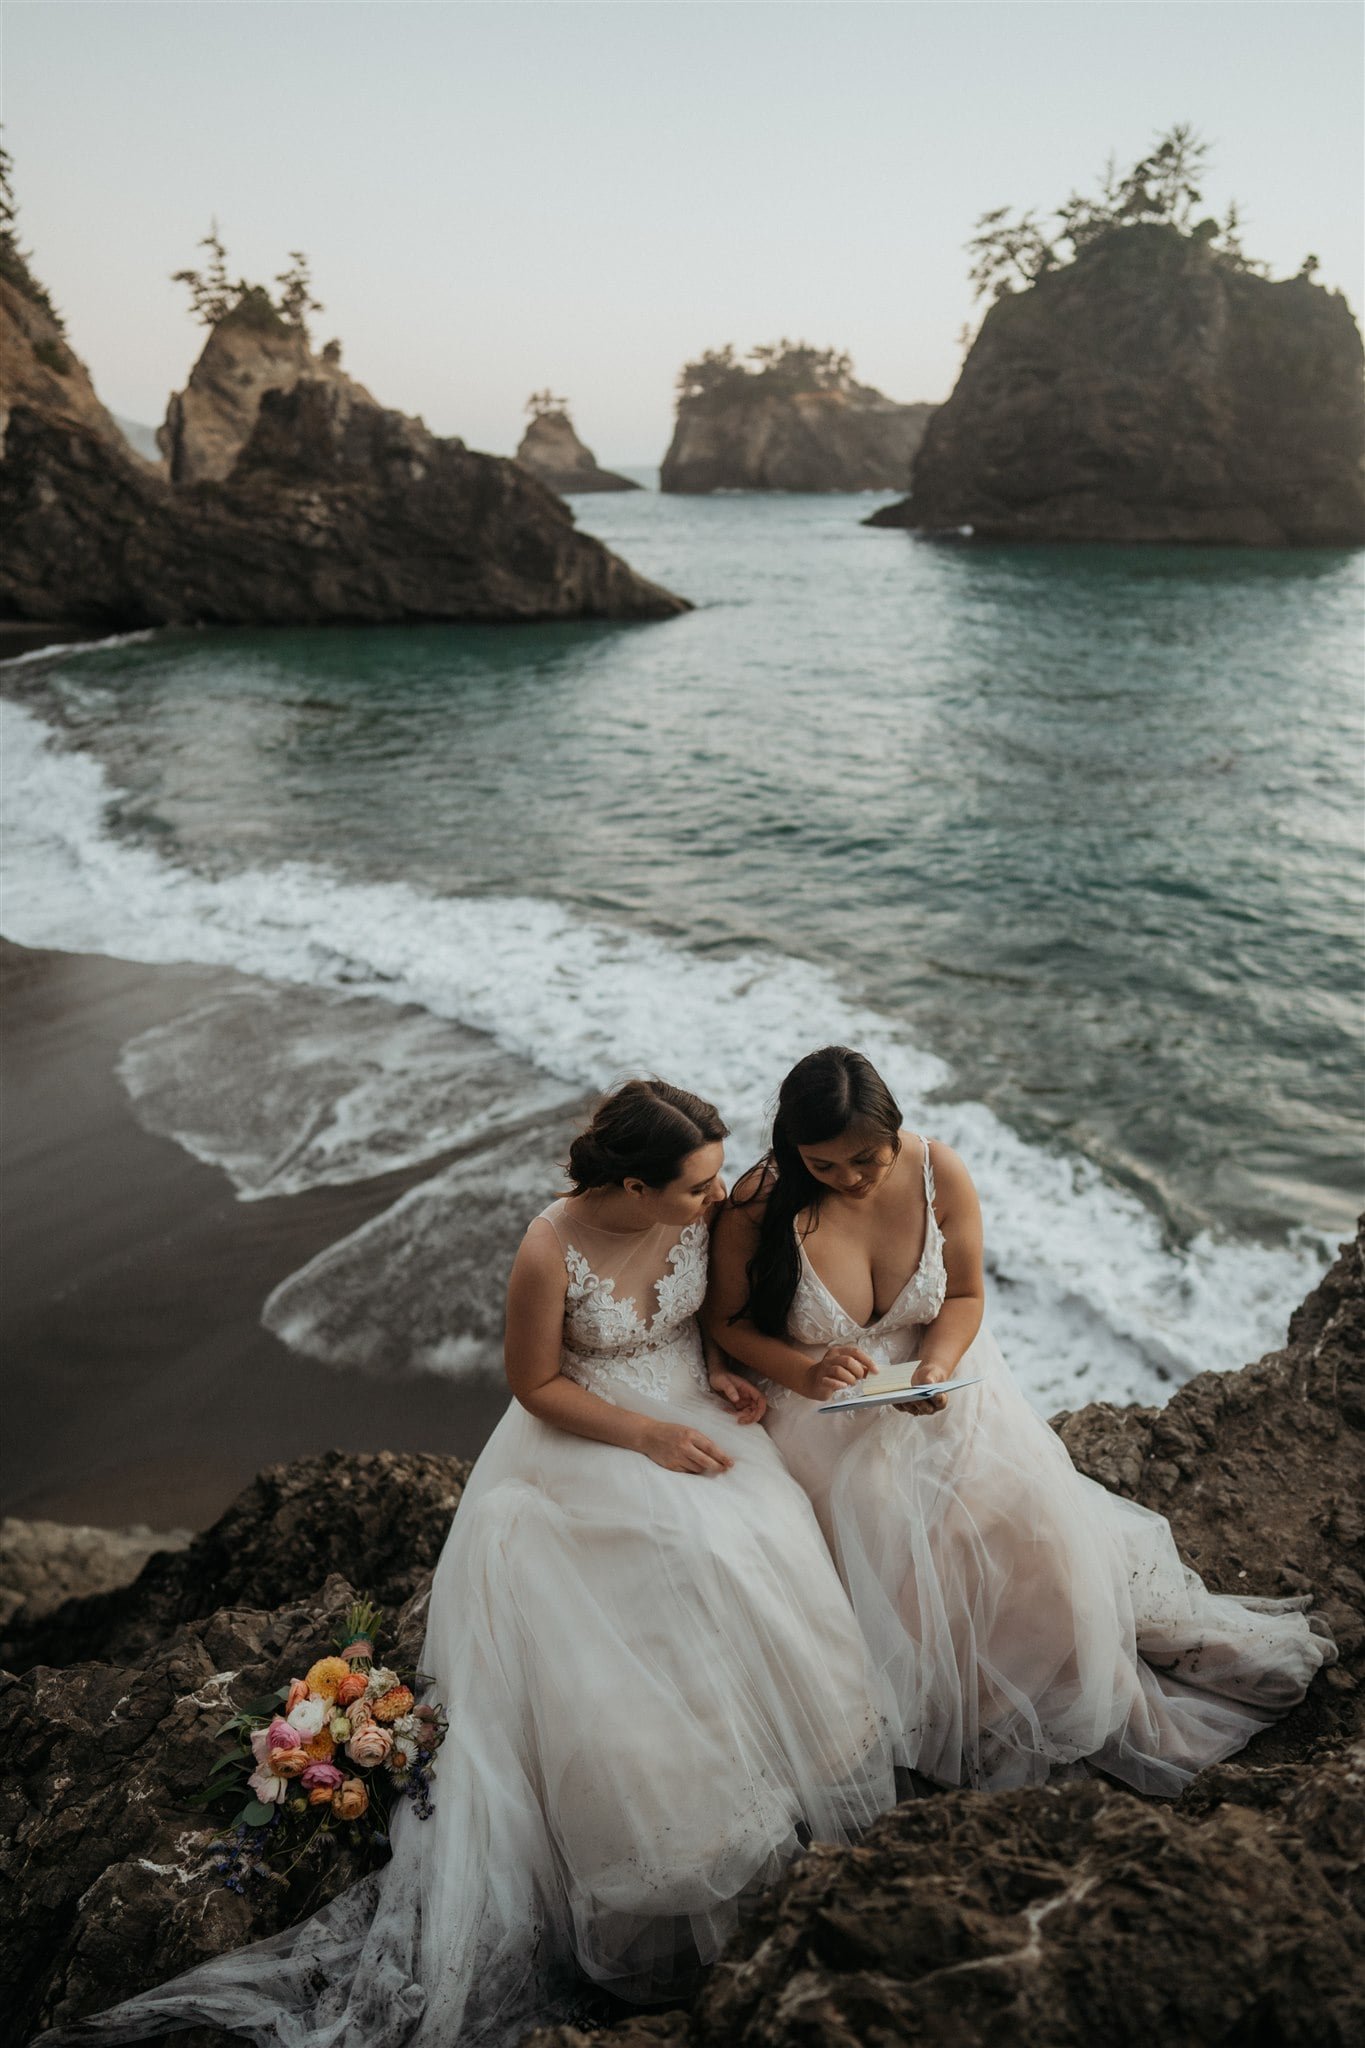 Brides reading letters from loved ones during their elopement at Secret Beach